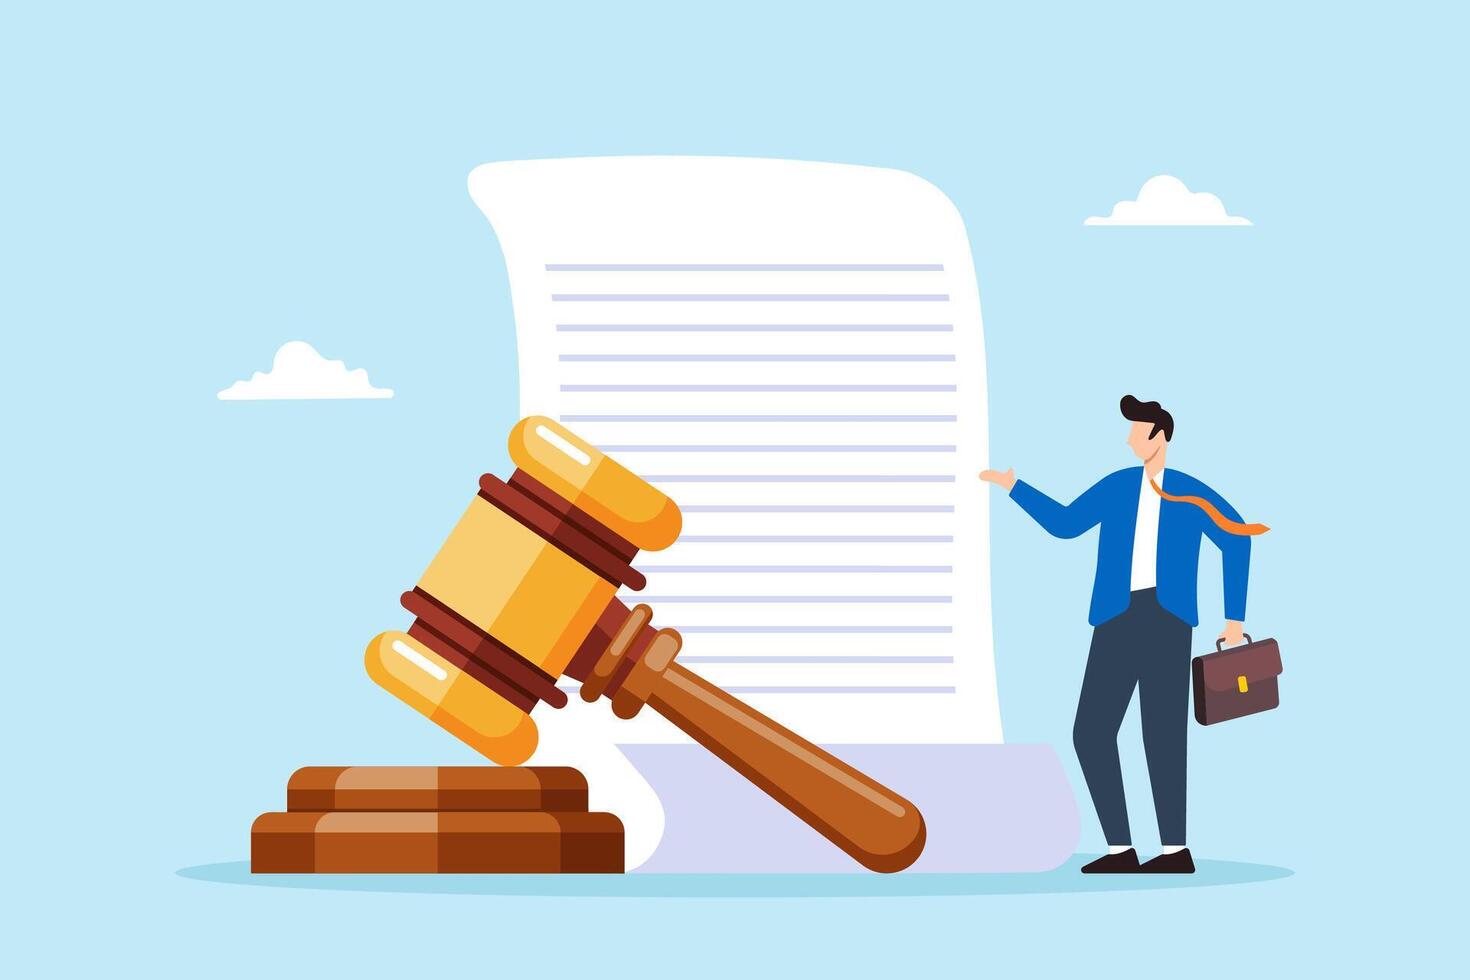 Mature lawyer stands with judge gavel and legal documents. Concept of professional attorney office, realm of law, and authorization of judicial decisions vector